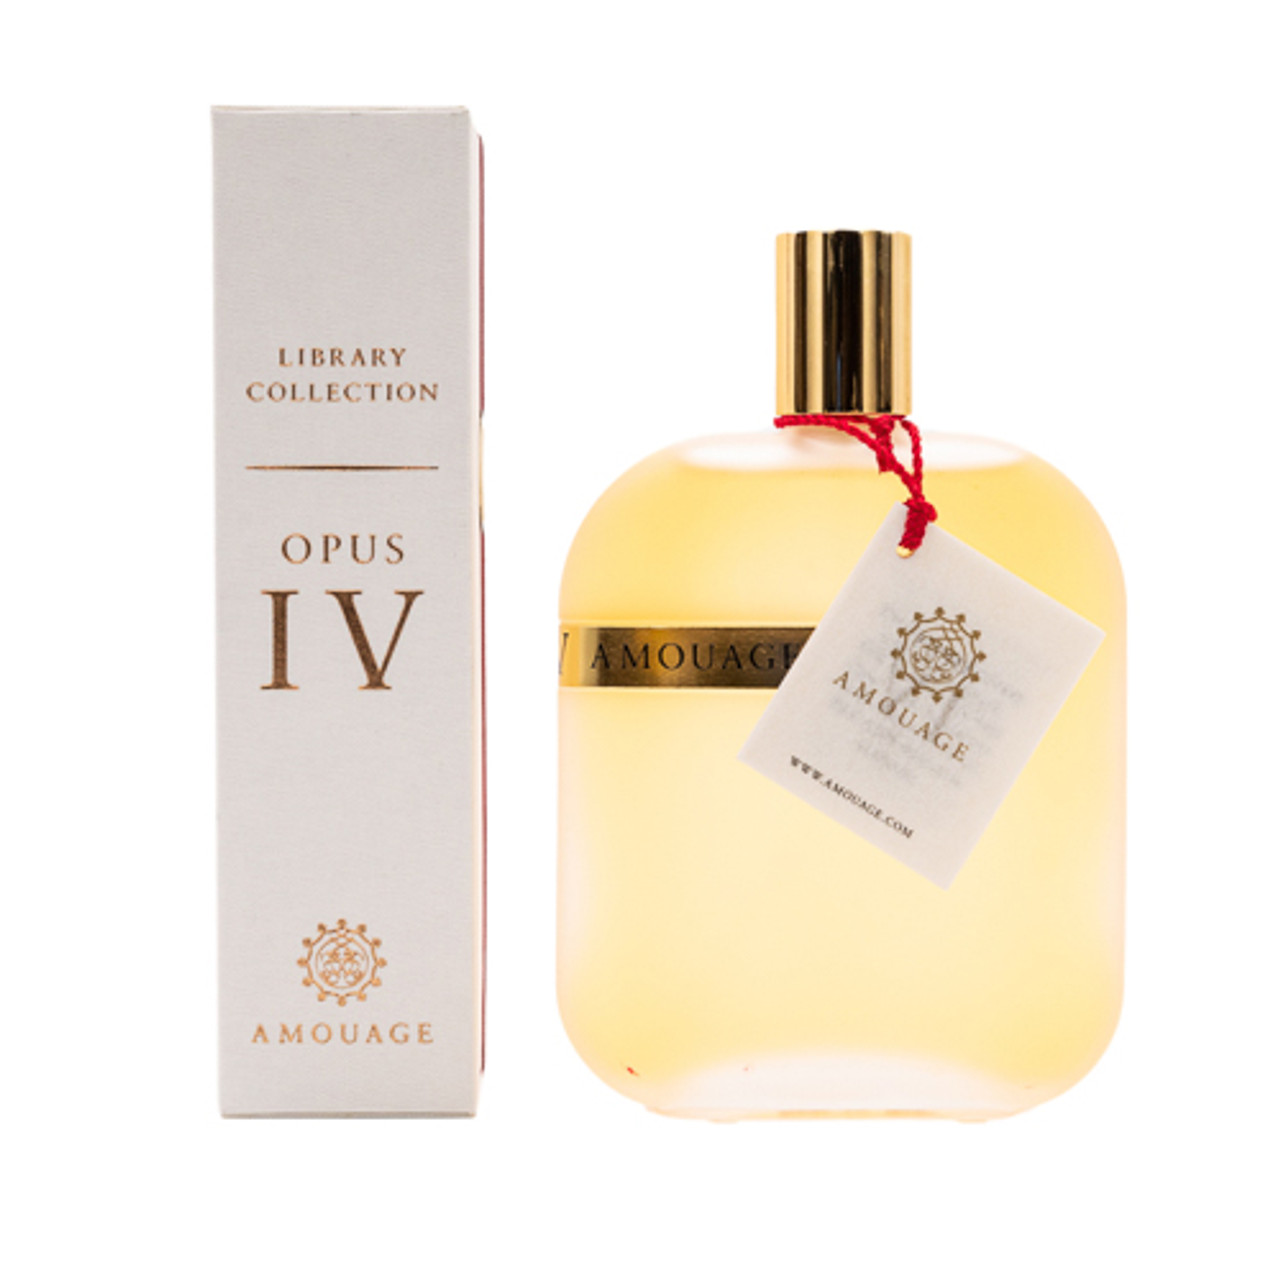 Amouage opus v. Amouage Opus 4. Amouage Opus 8. The Library collection Opus 11 духи.